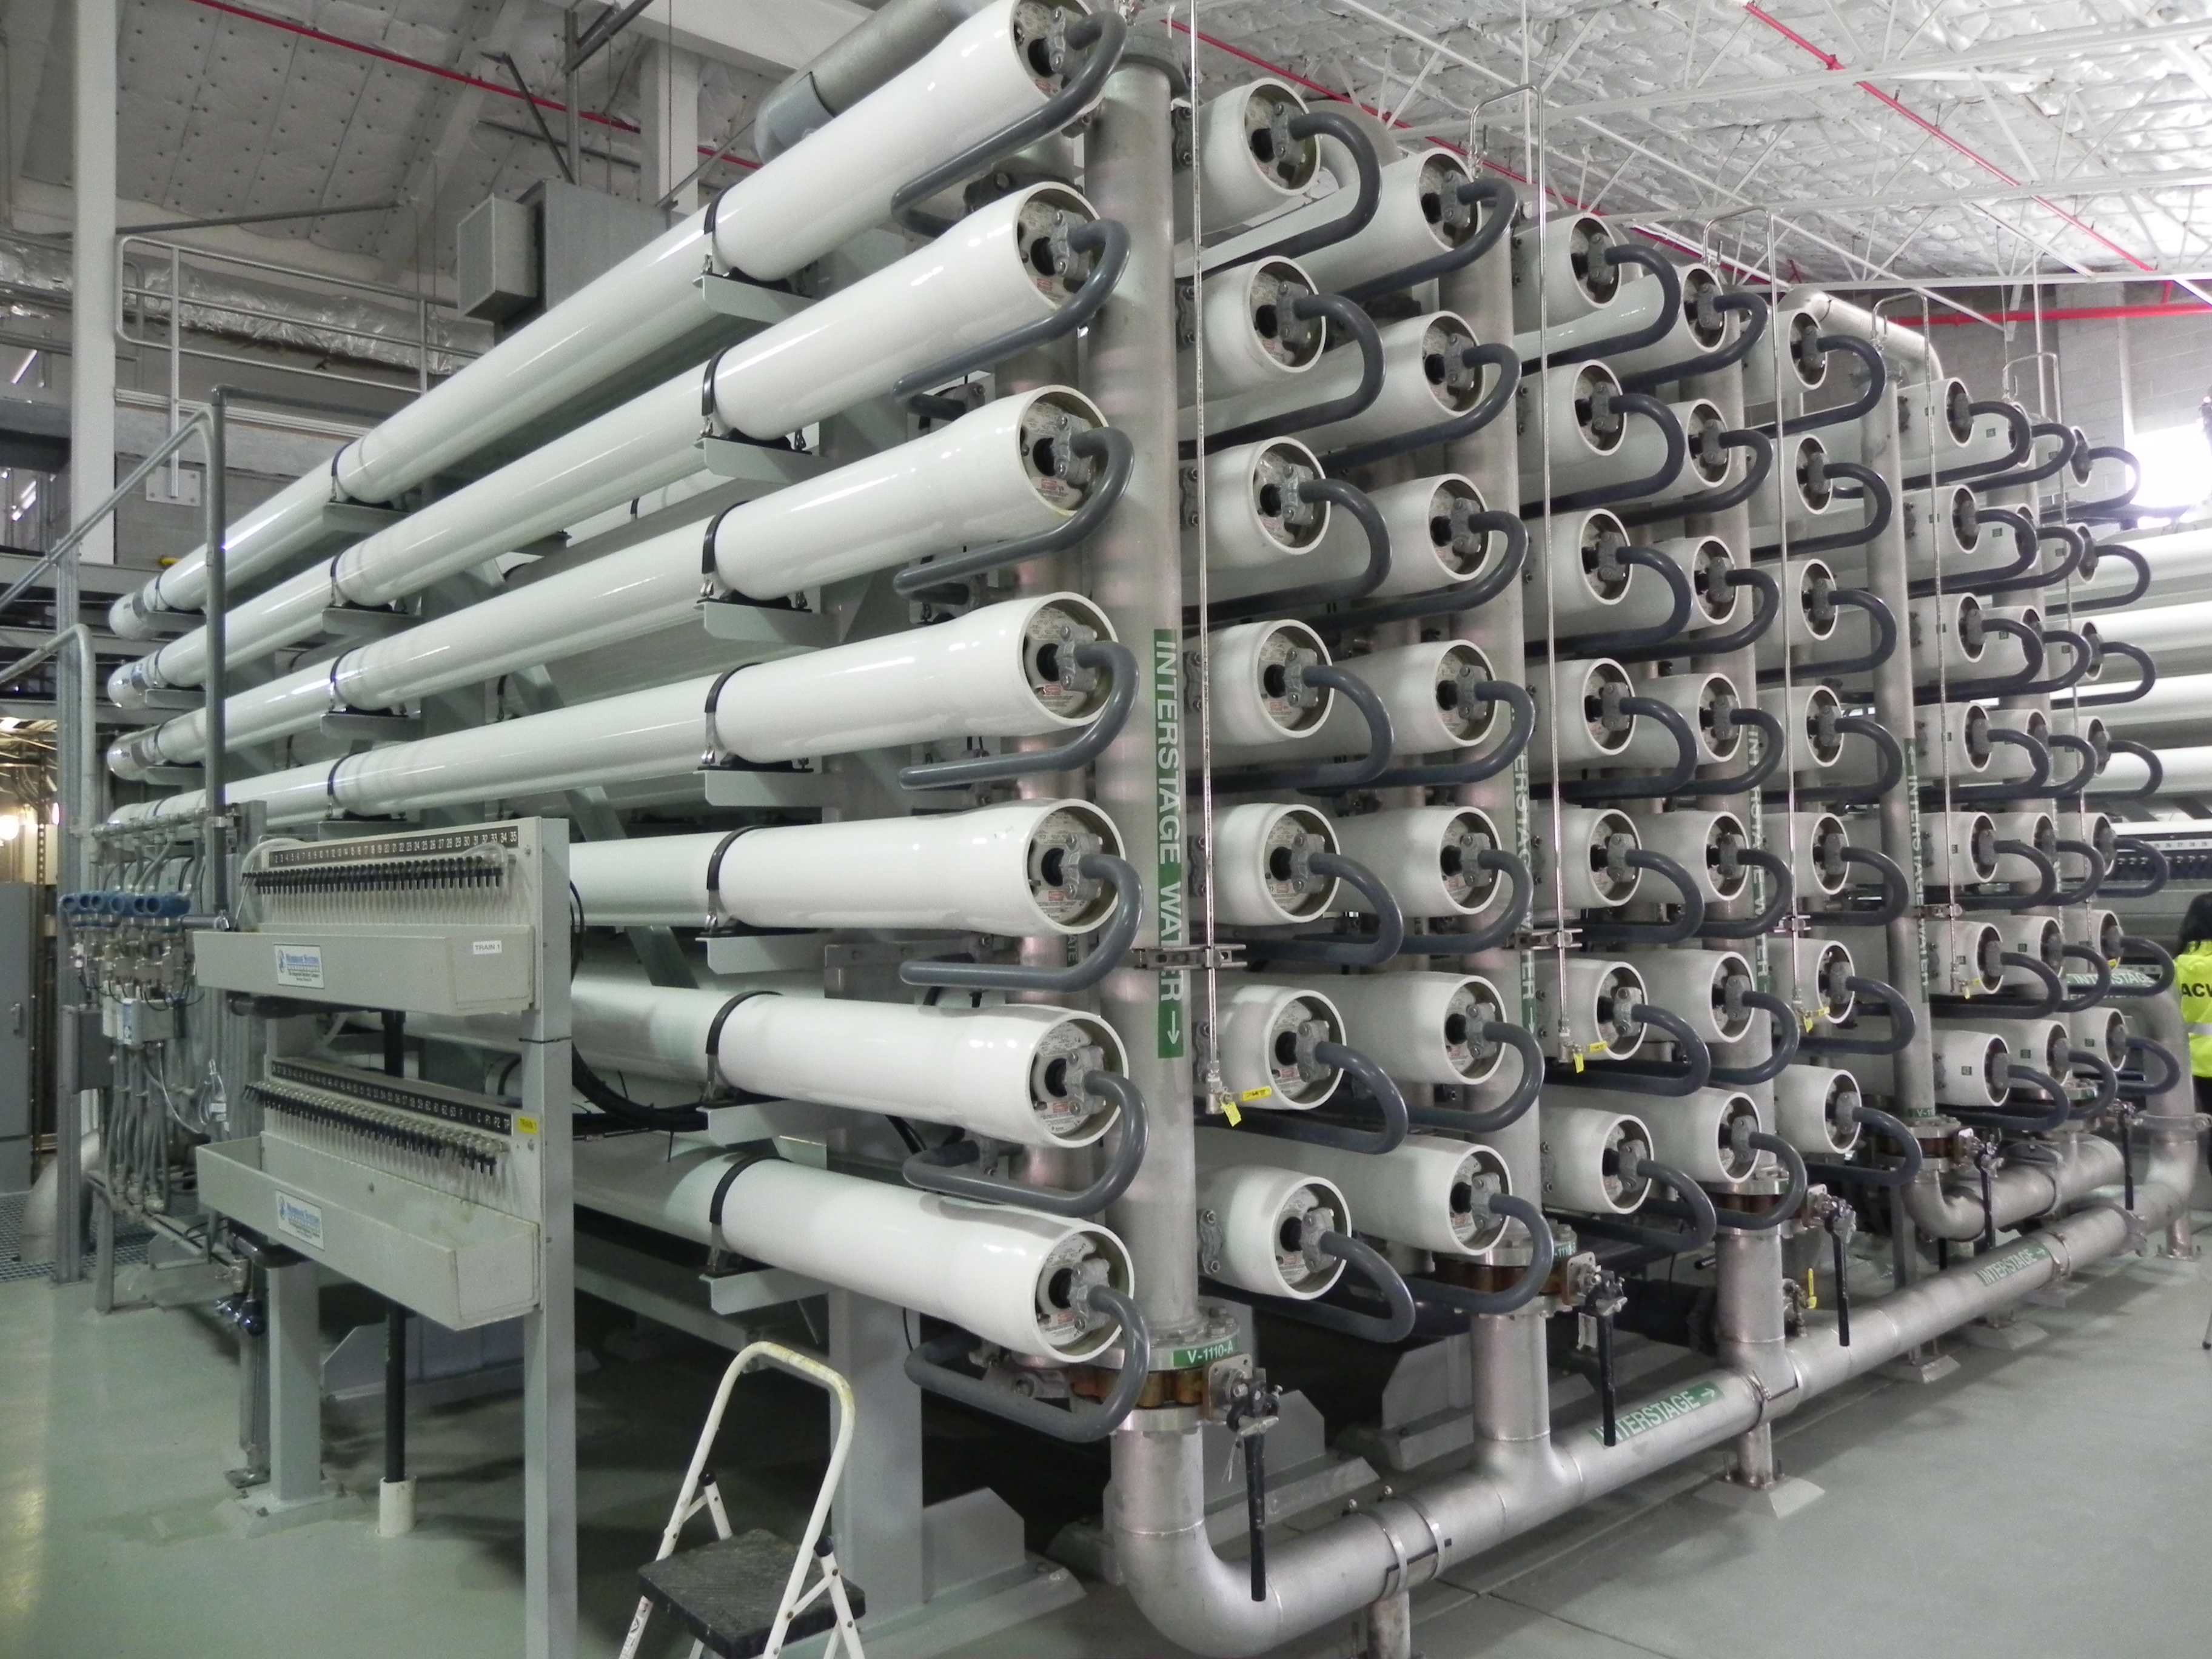 Photograph of a skid of reverse osmosis membranes installed at the Alameda County Water District  Newark Desalination Facility.  These membranes, installed in 2010, remove salts from brackish groundwater to provide high quality water to local customers.